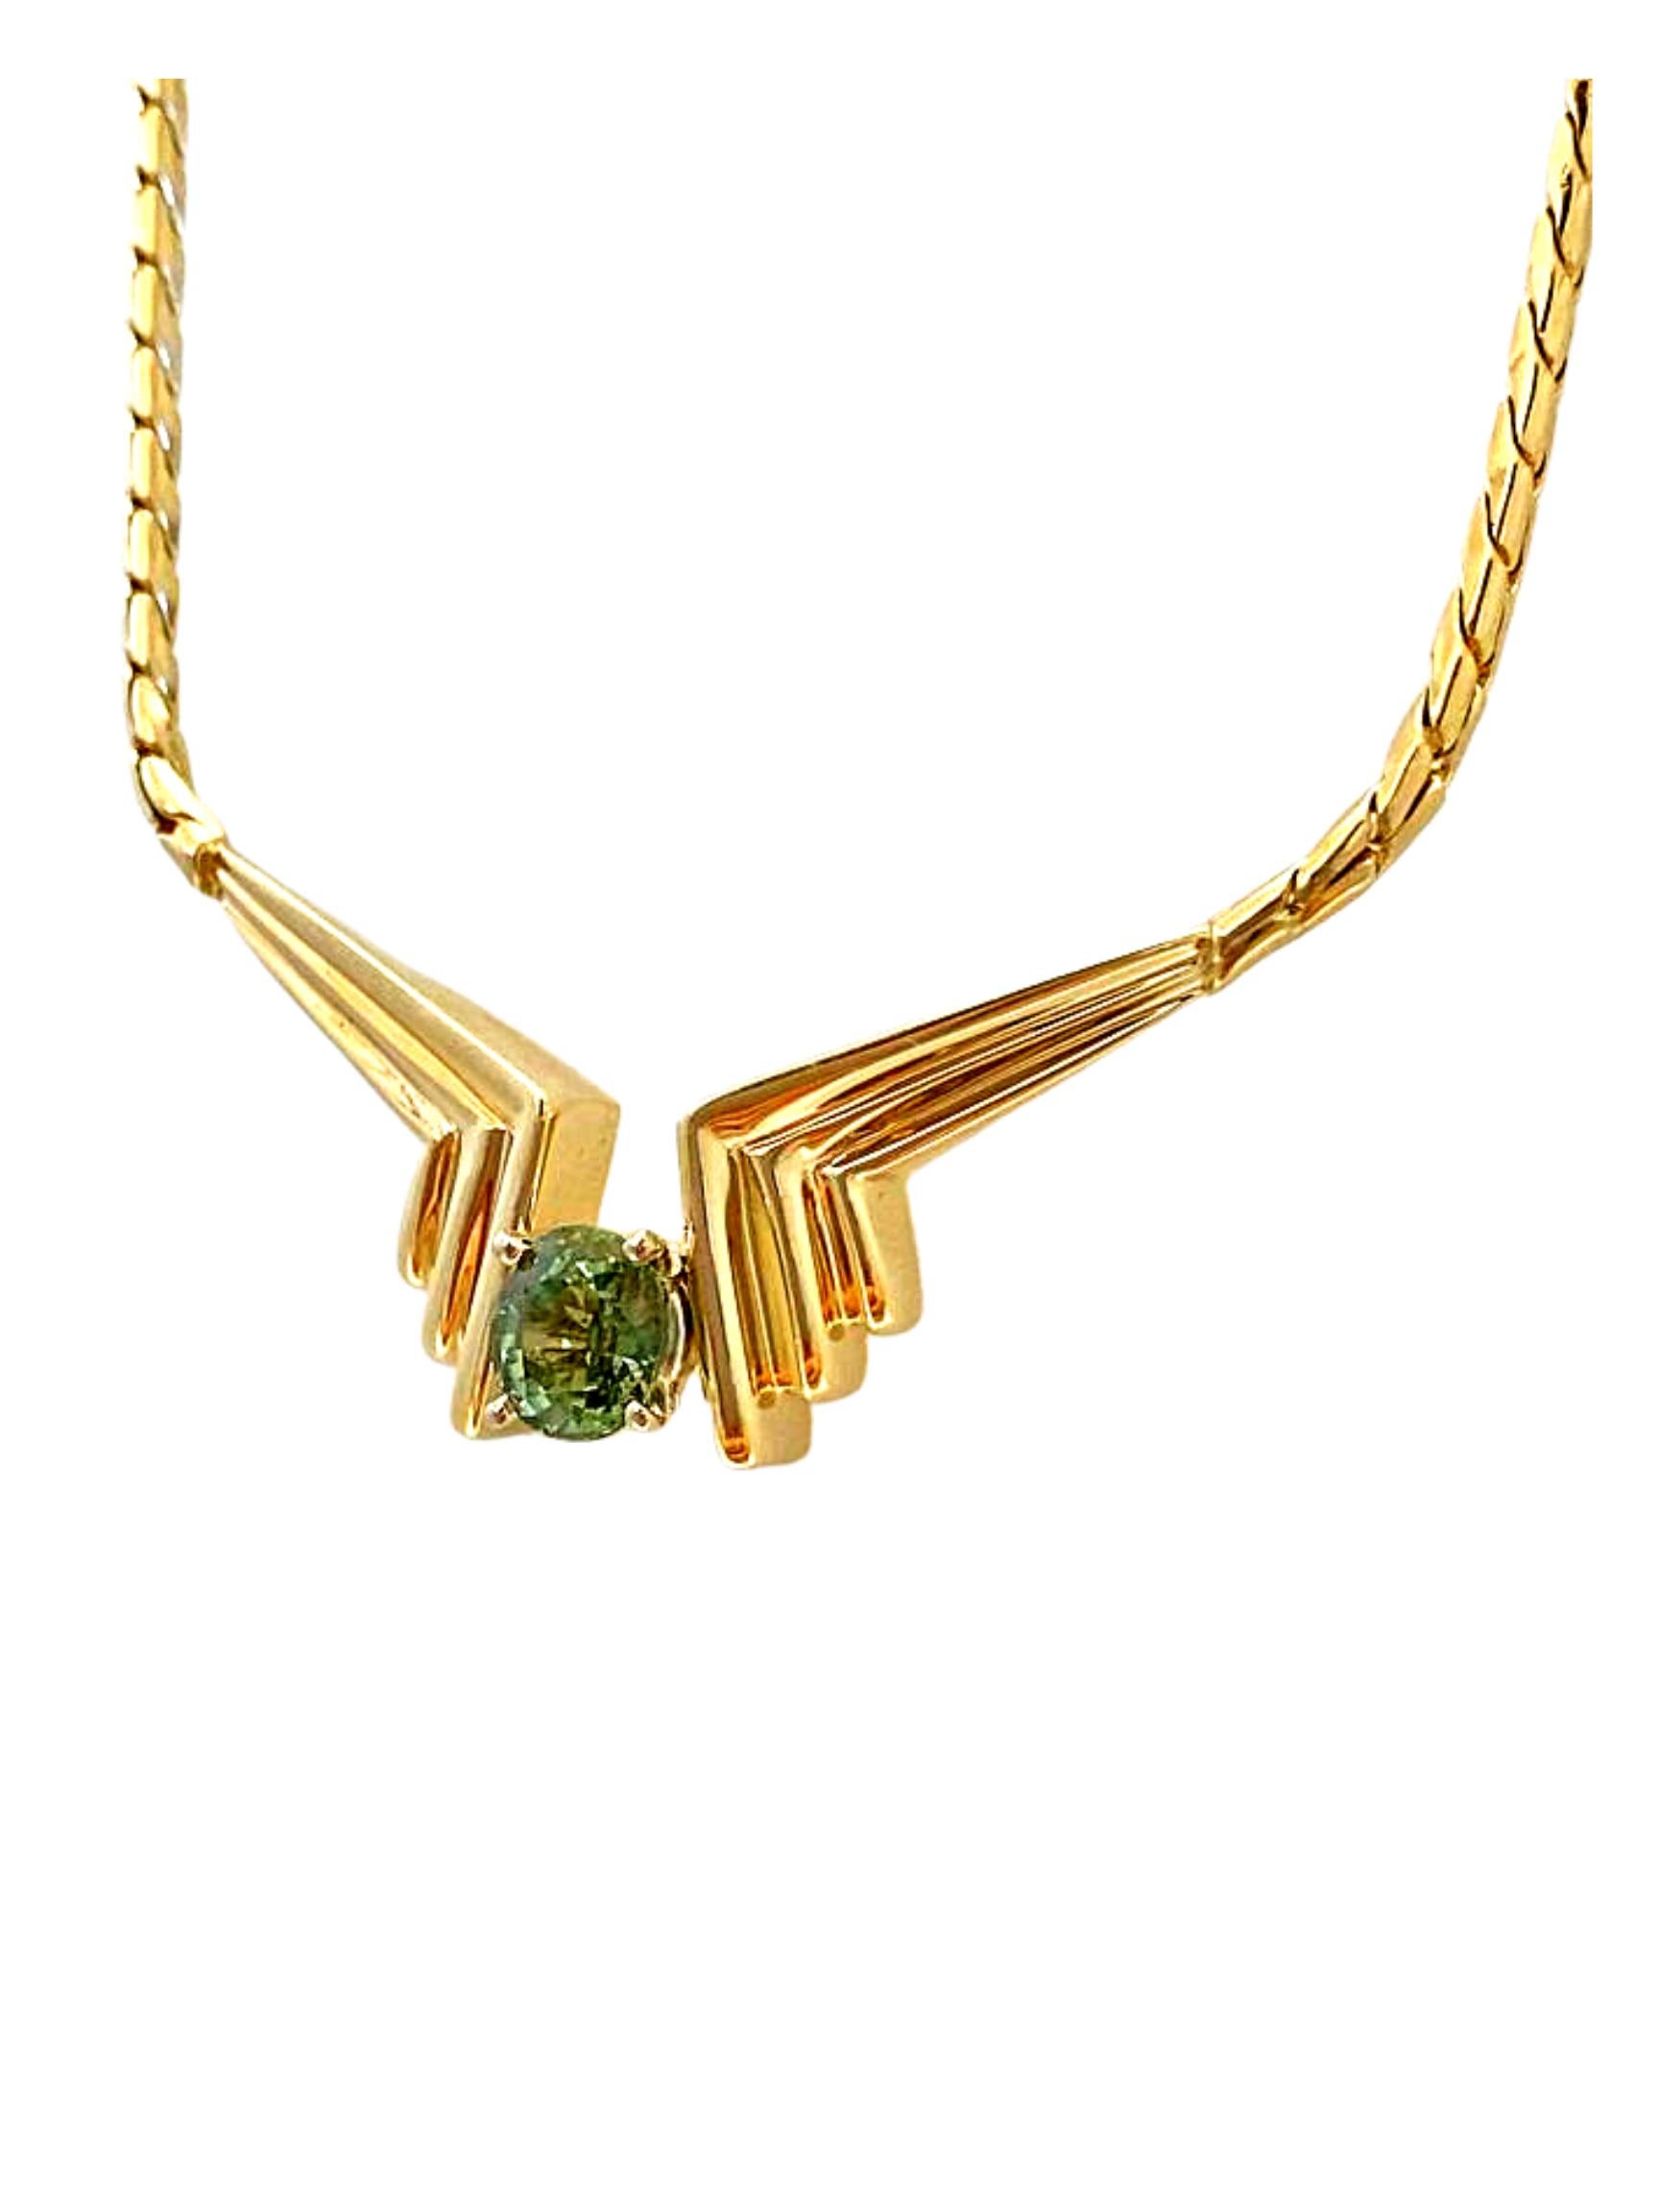 Oval Cut 2.08 Carat Oval-Cut Green Sapphire and 14K Yellow Gold Choker Pendant Necklace For Sale